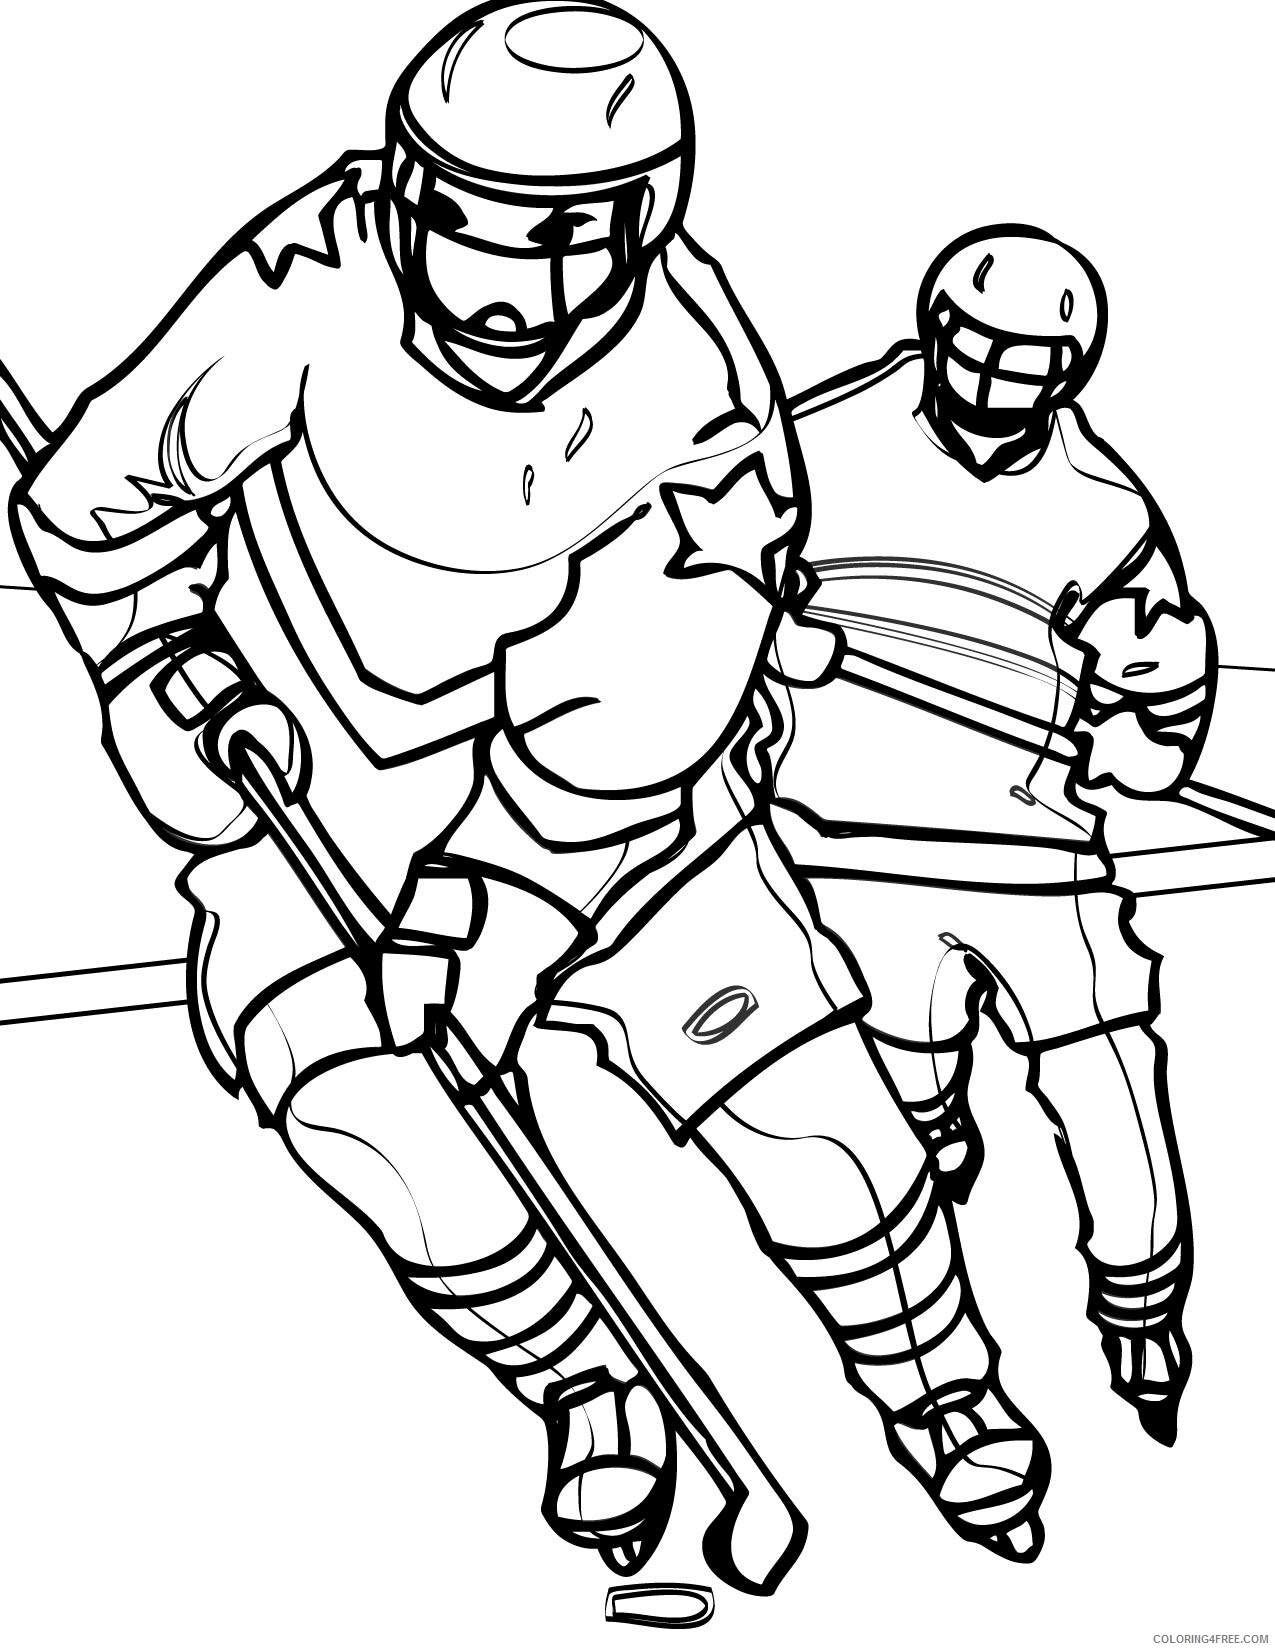 Hockey Coloring Pages strong sports pictures to stunning day Printable 2021 3325 Coloring4free